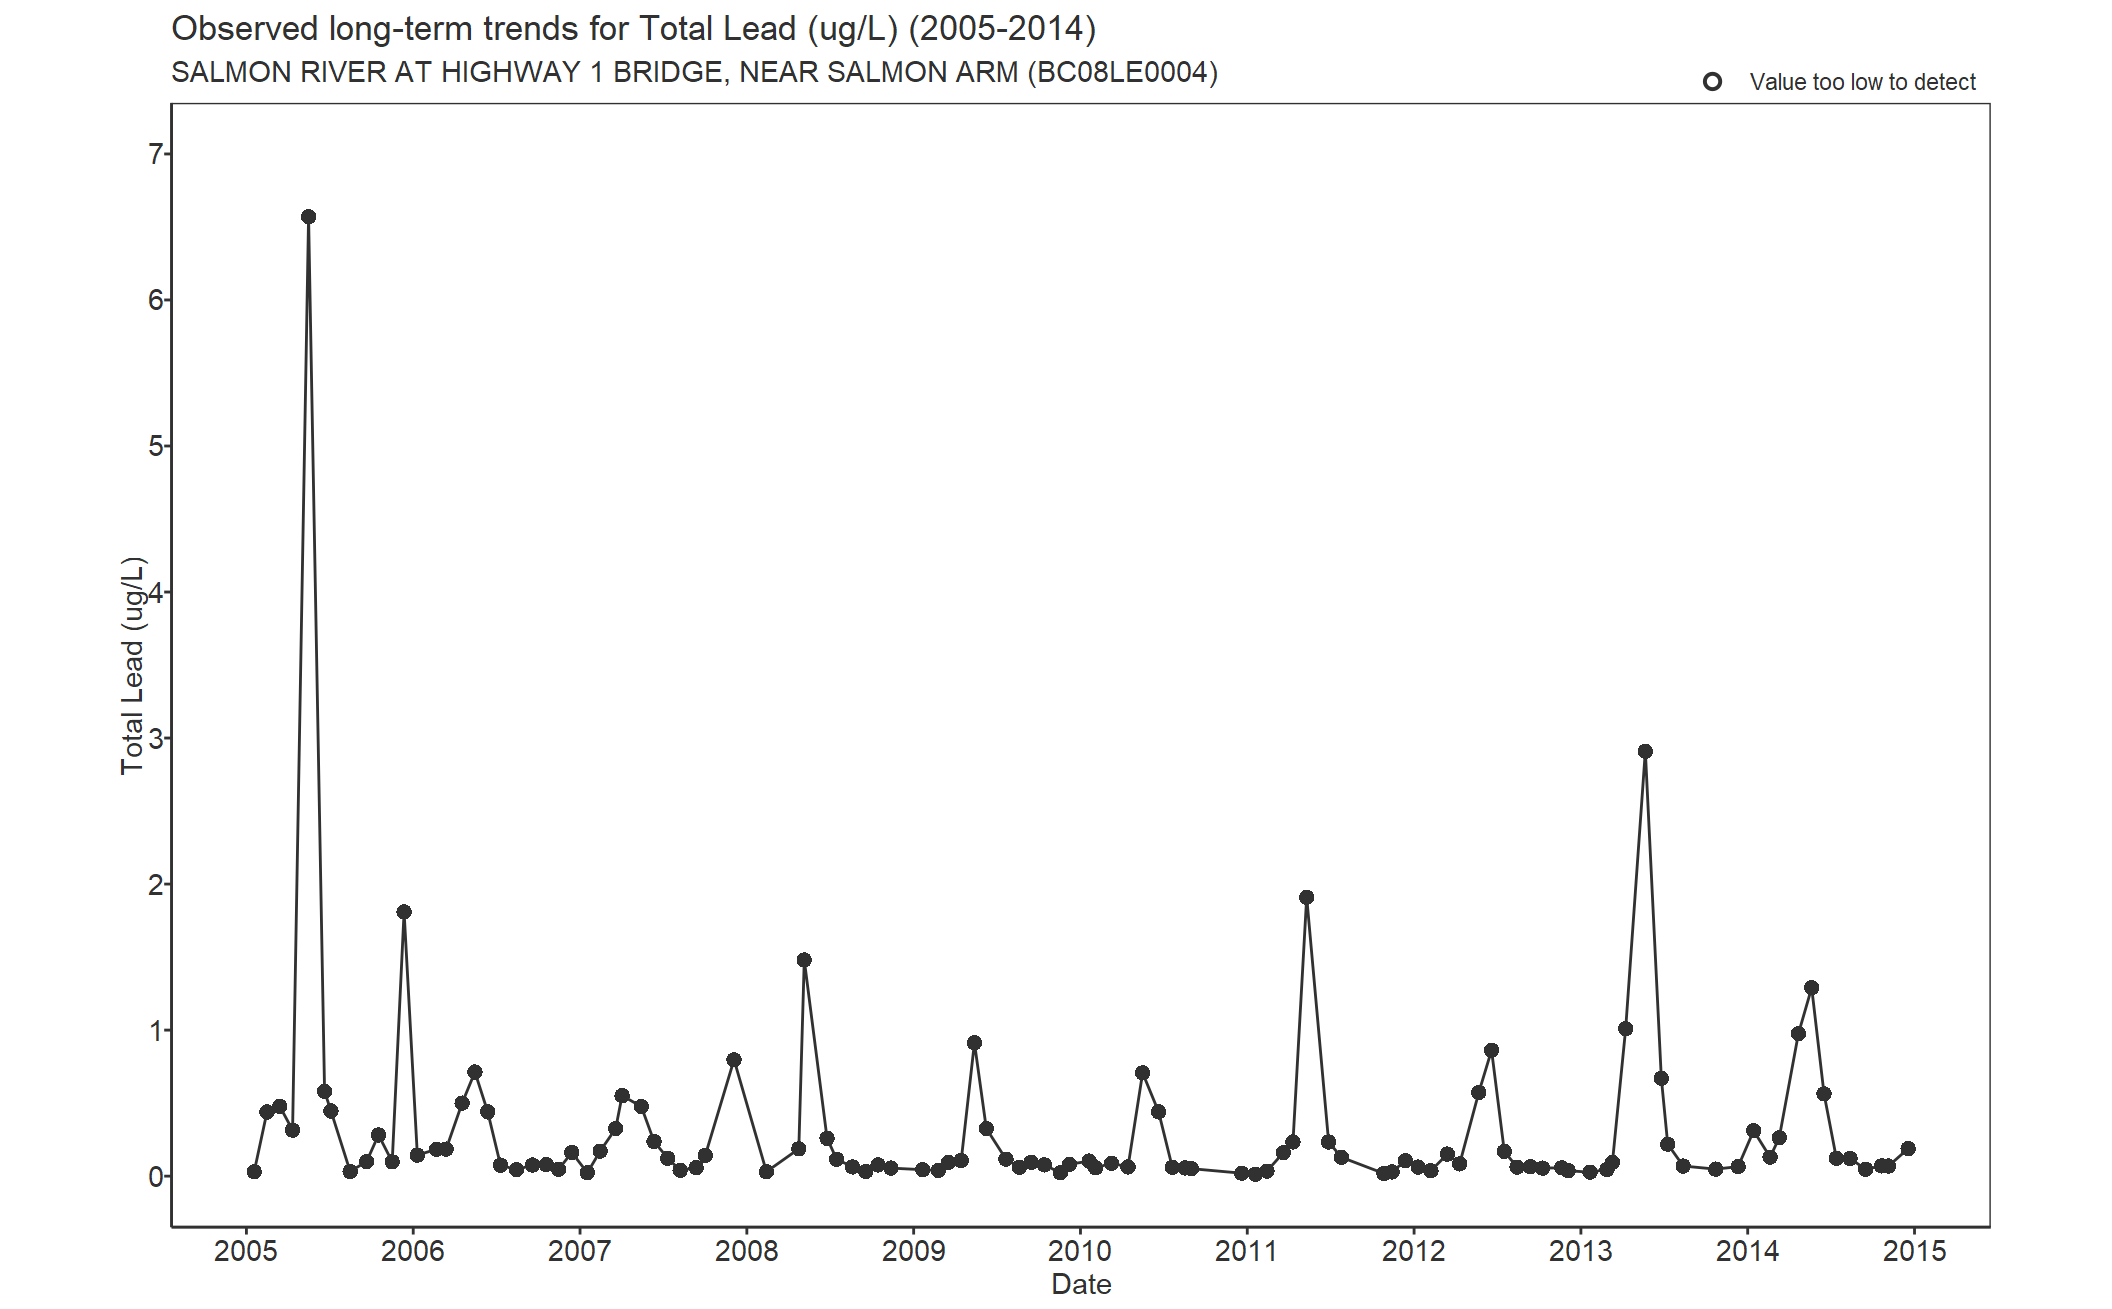 Observed long-term trends for Lead Total (2005-2014)